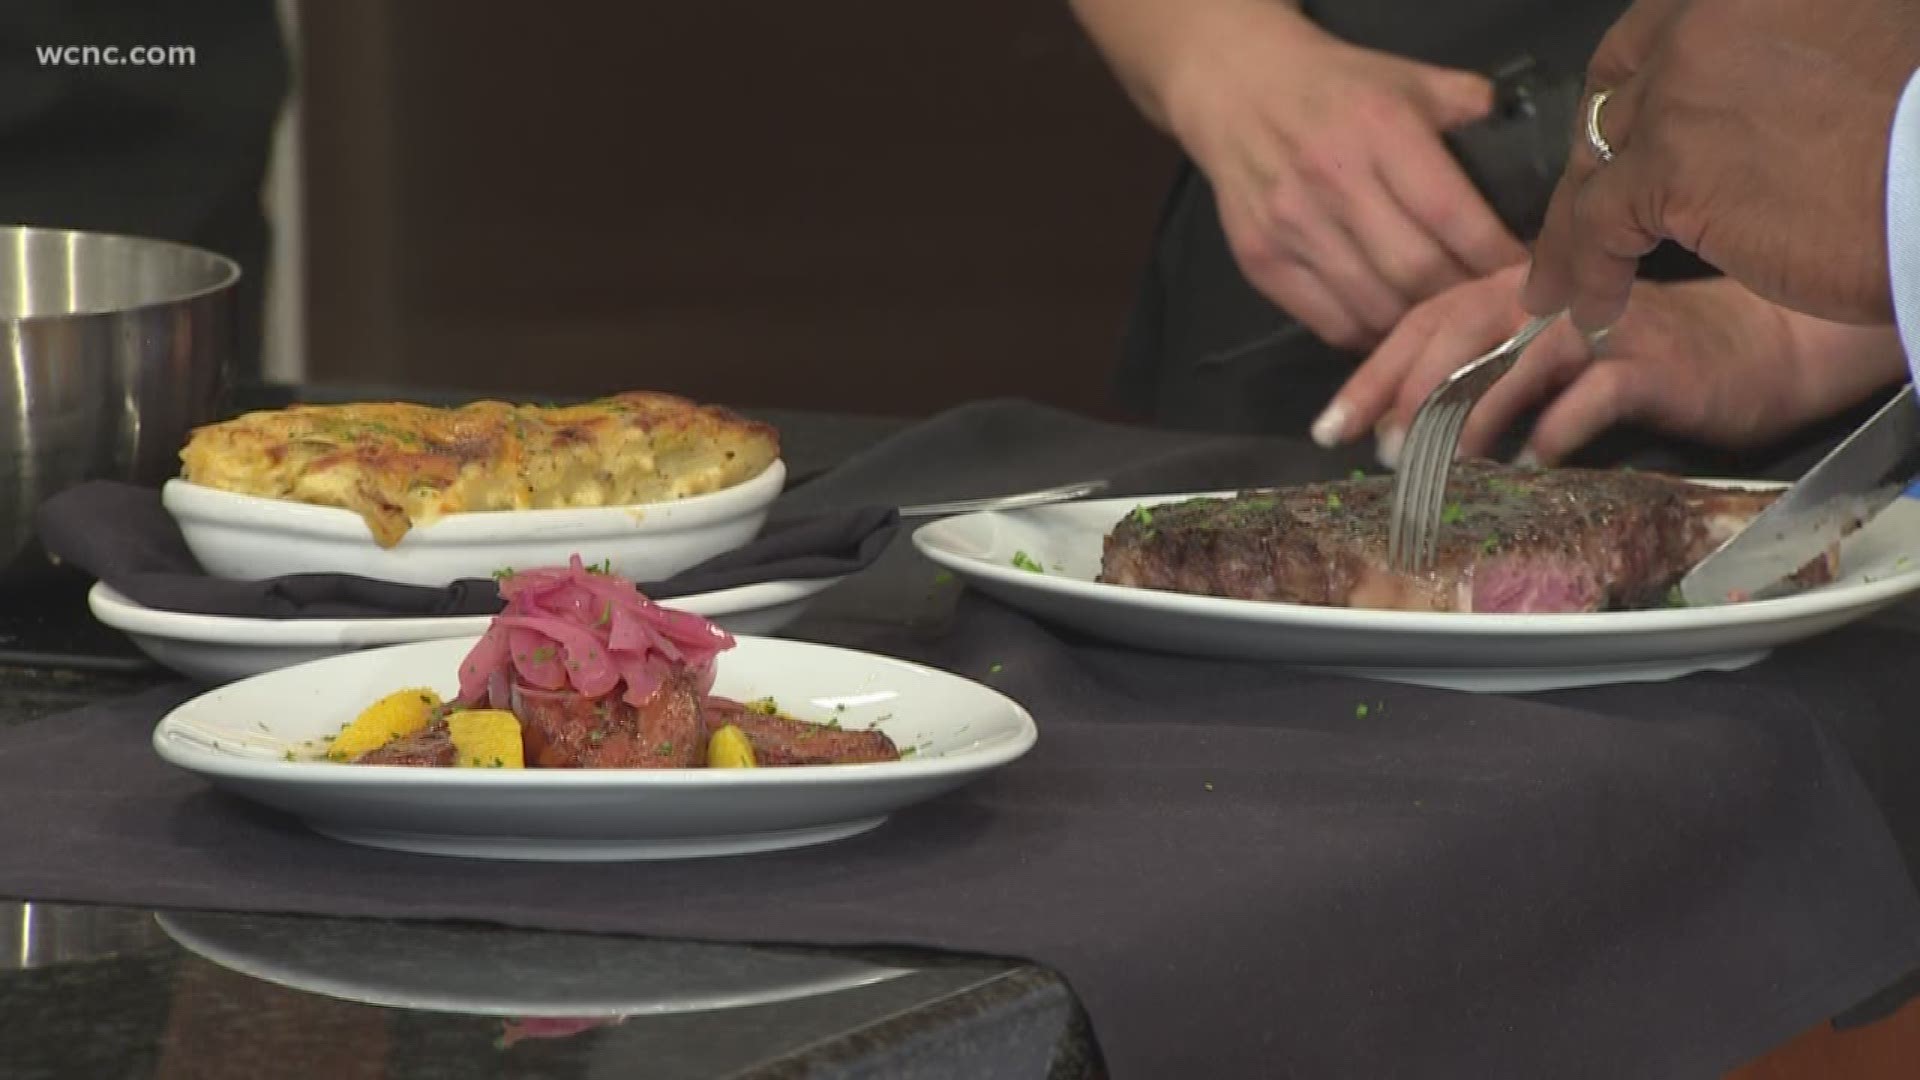 Robert Castillo shows us how to make the perfect steak